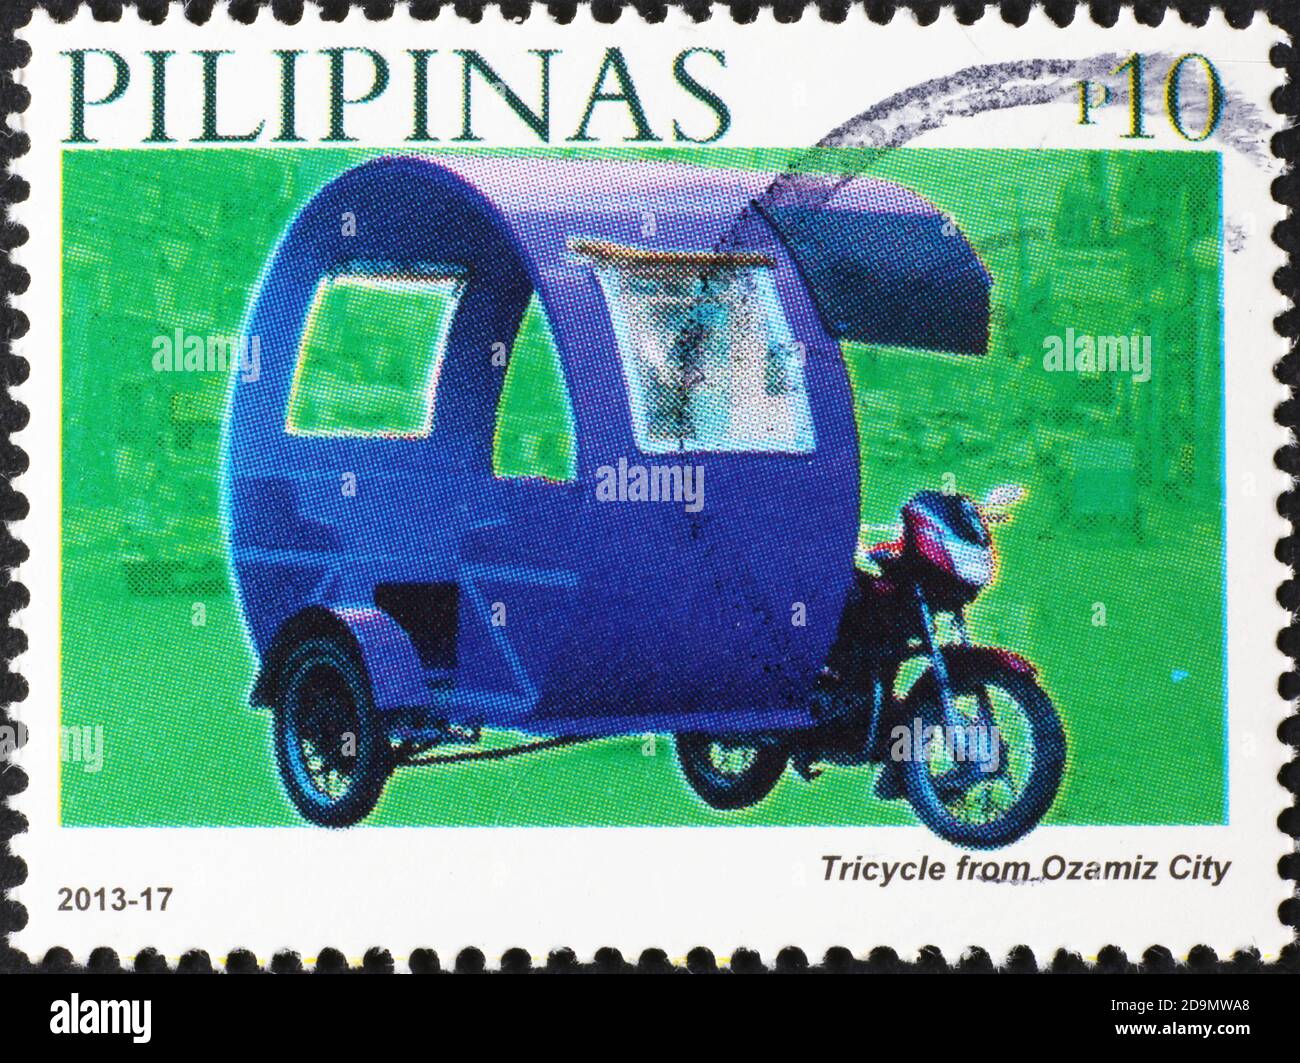 Motorized tricycle on stamp of Philippines Stock Photo